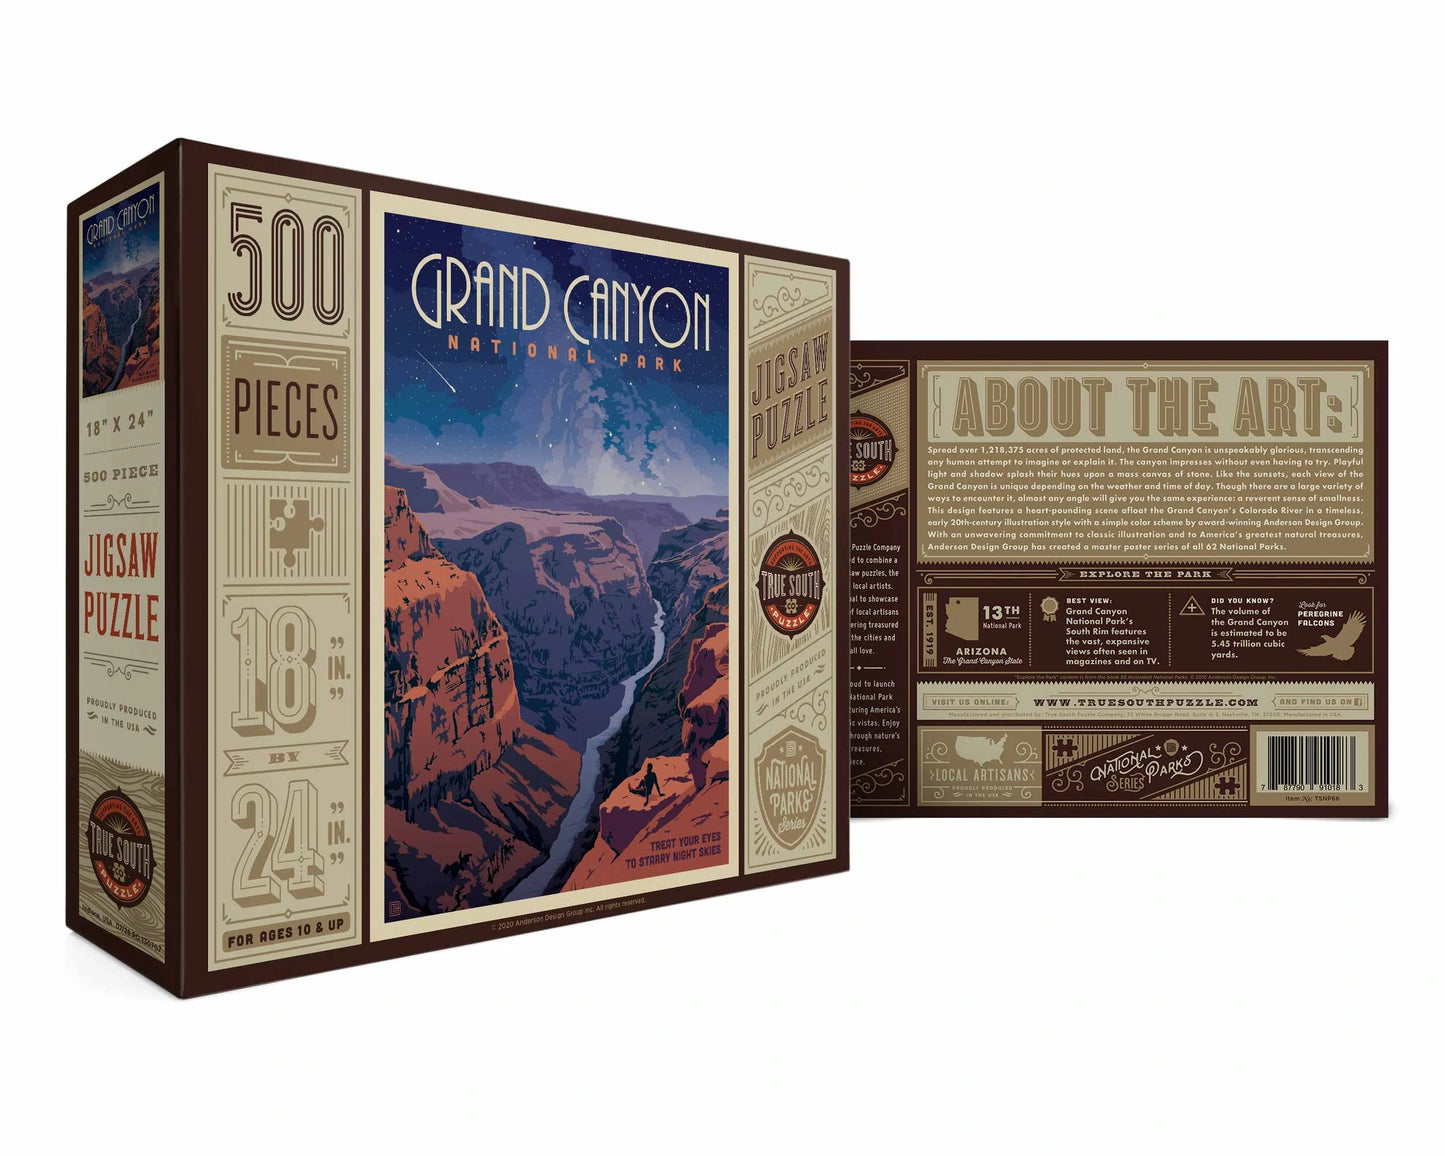 Grand Canyon Starry Nights Jigsaw Puzzle